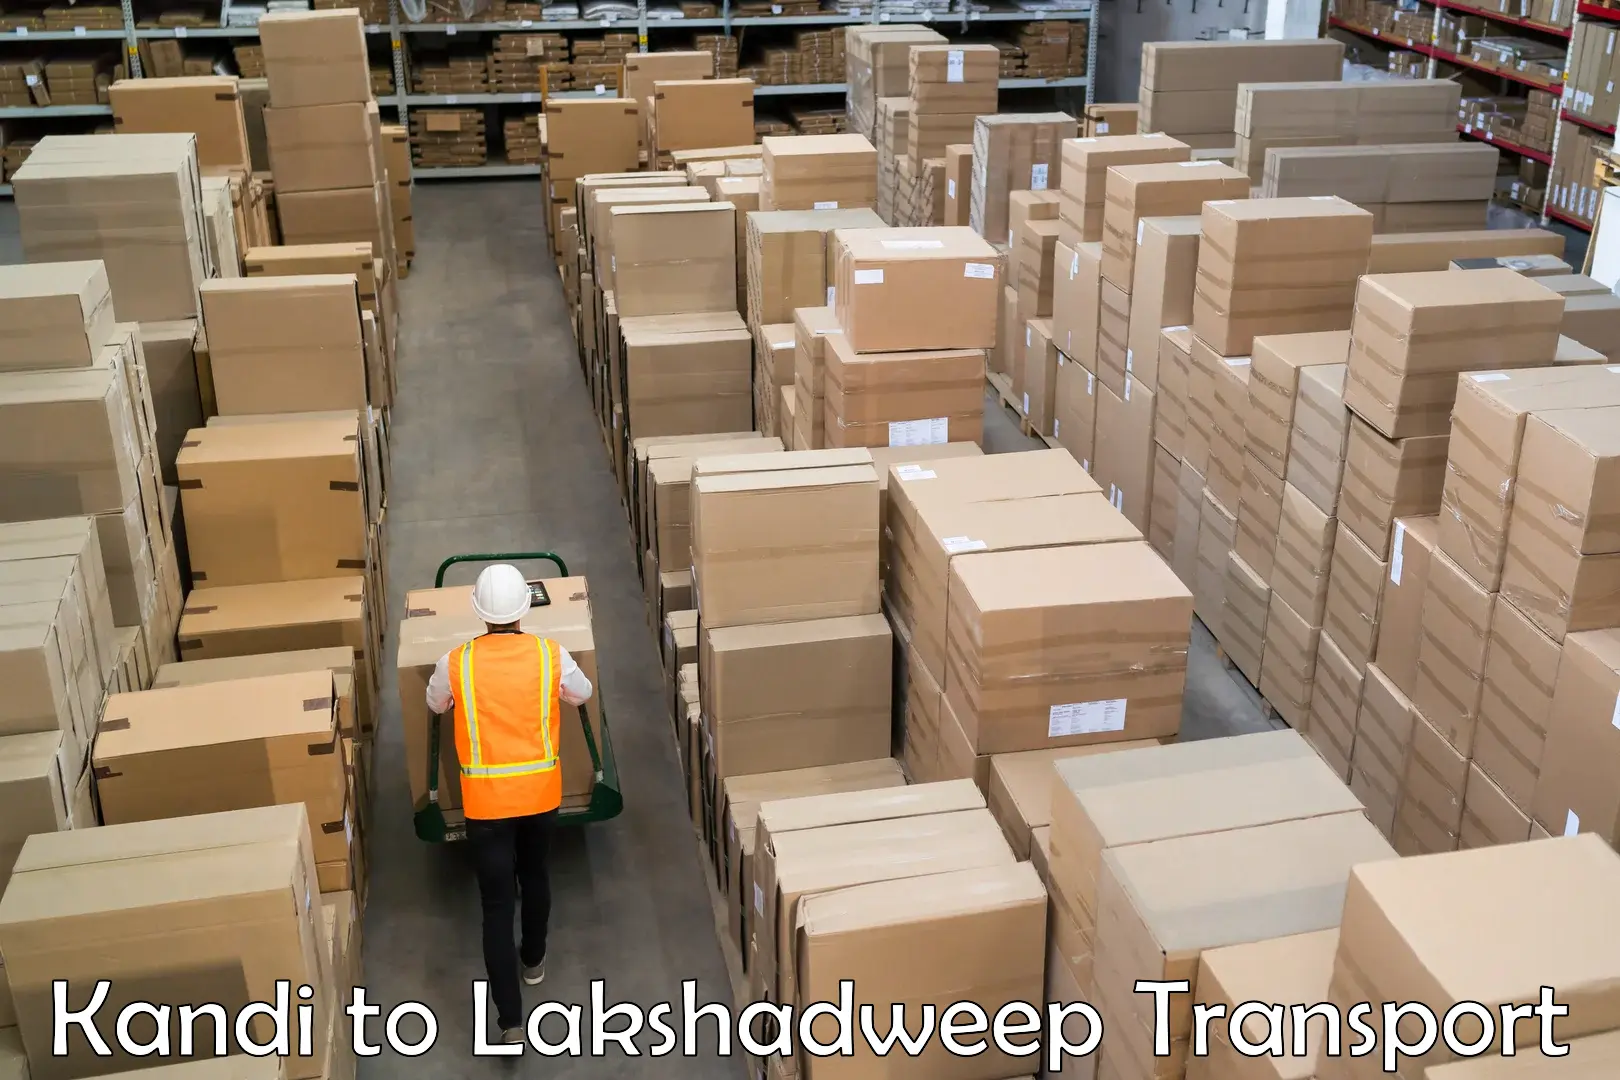 Truck transport companies in India in Kandi to Lakshadweep